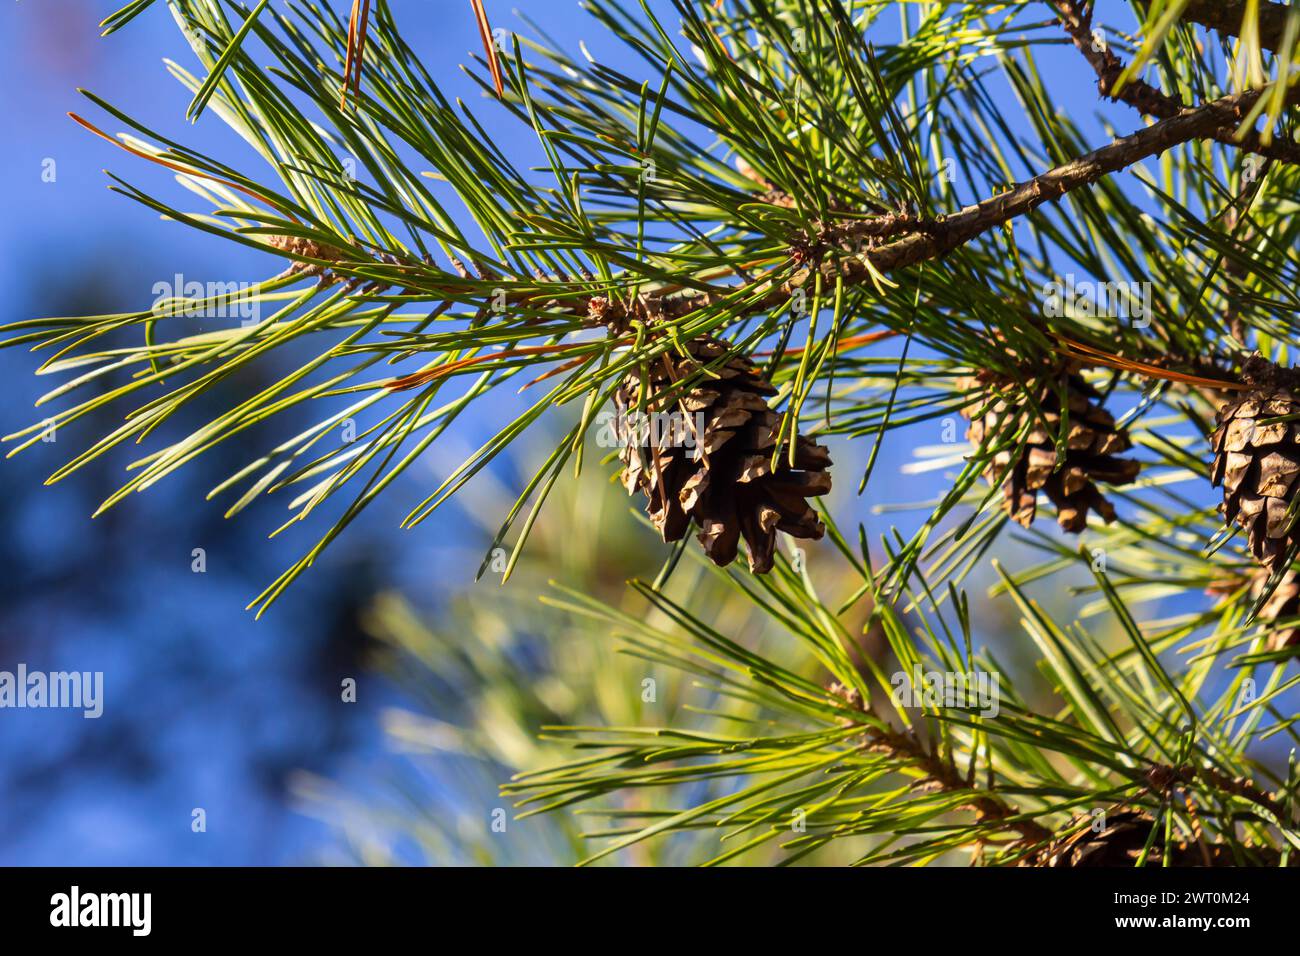 Close-up on a pretty pine cone hanging from its branch and surrounded by its green thorns. Pine cone, pine thorns, pine branch and blue sky. Stock Photo